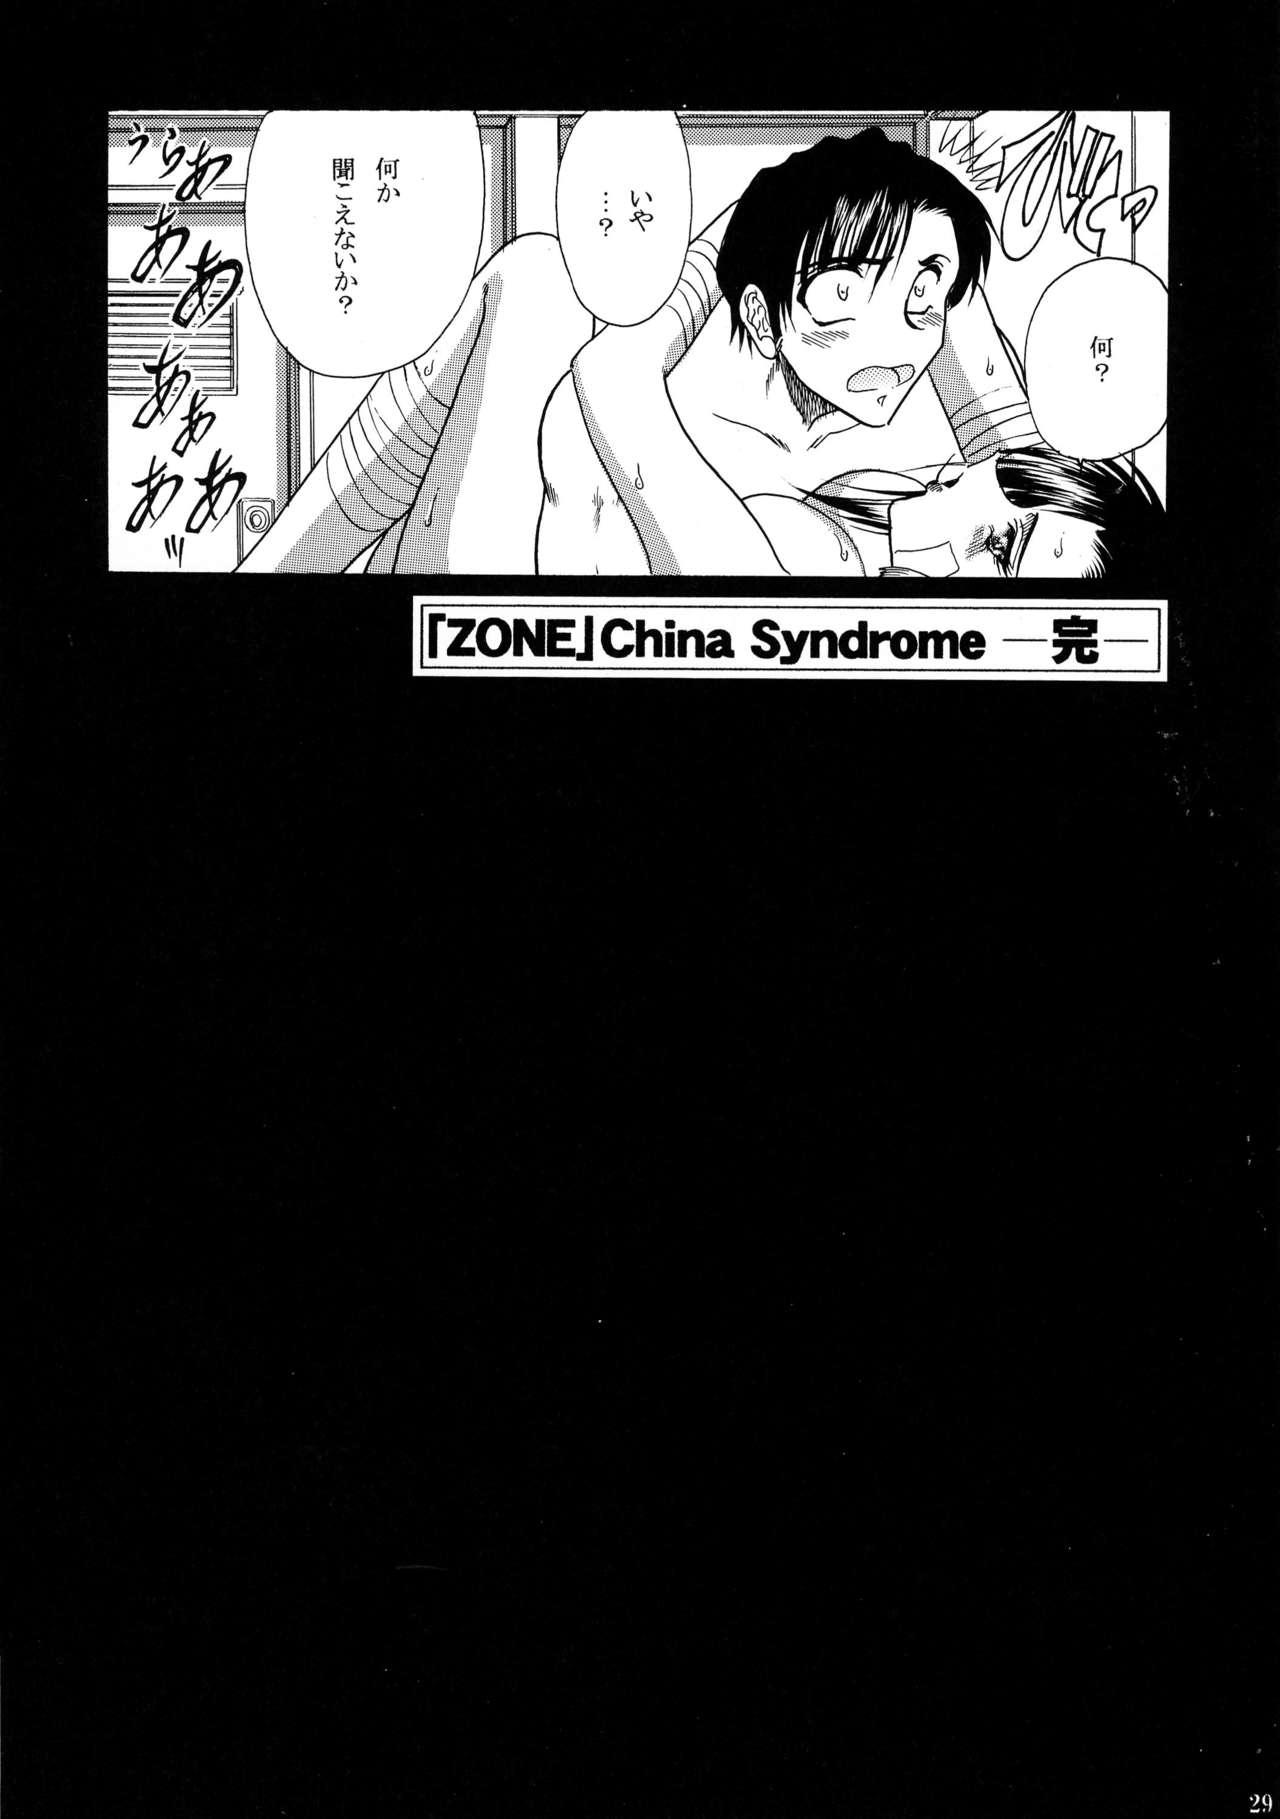 Swallow ZONE 38 China Syndrome - Black lagoon Chaturbate - Page 28